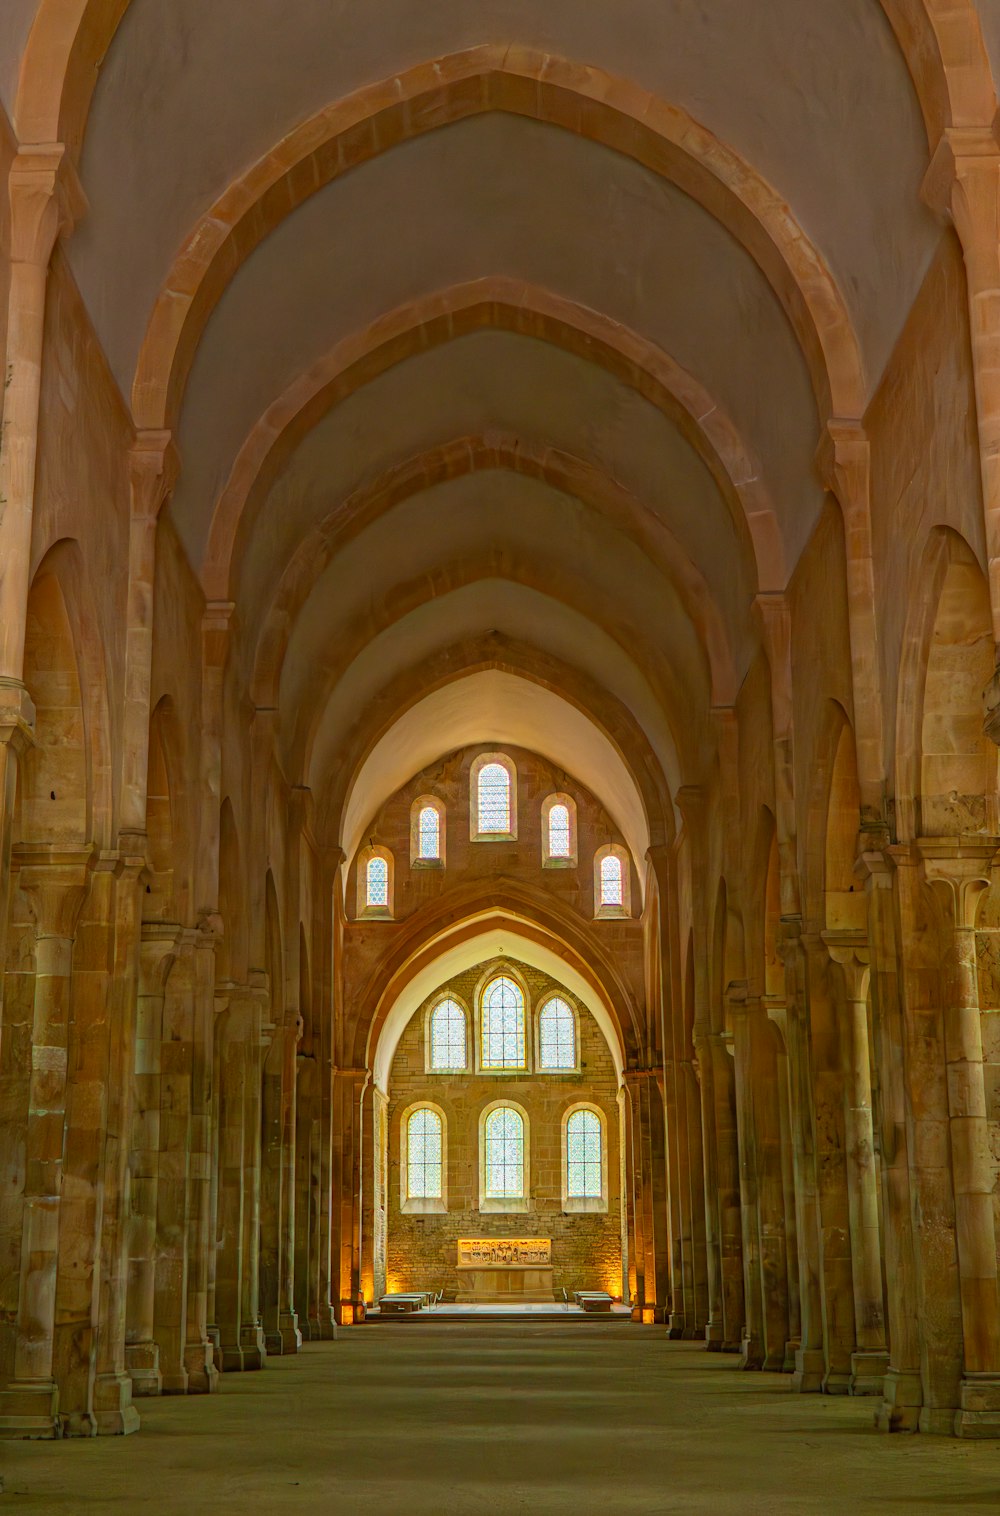 a large cathedral with stone columns and arches